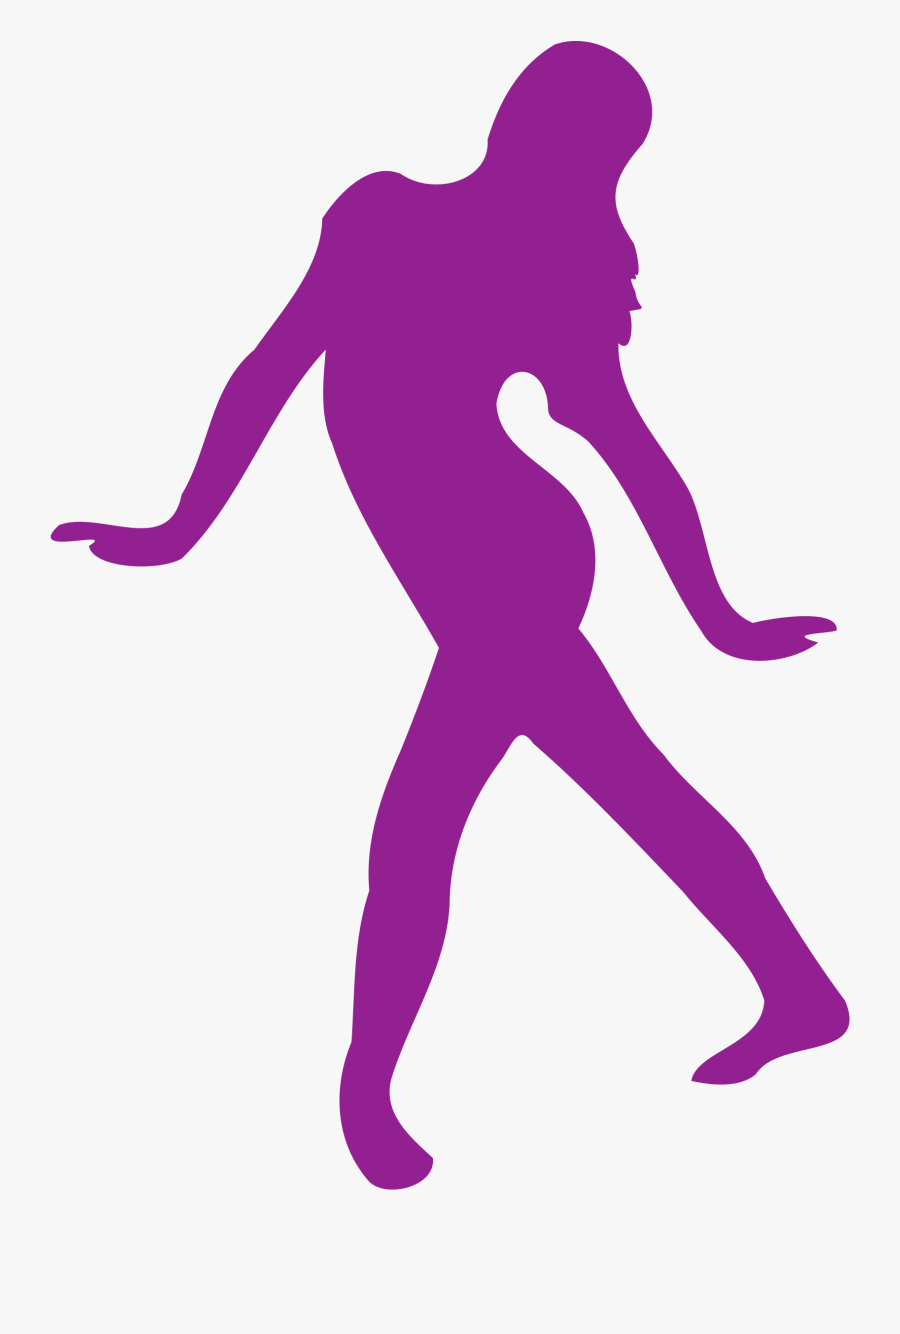 This Free Icons Png Design Of Silhouette Danse - Transparent Purple Dancer Silhouette, Transparent Clipart